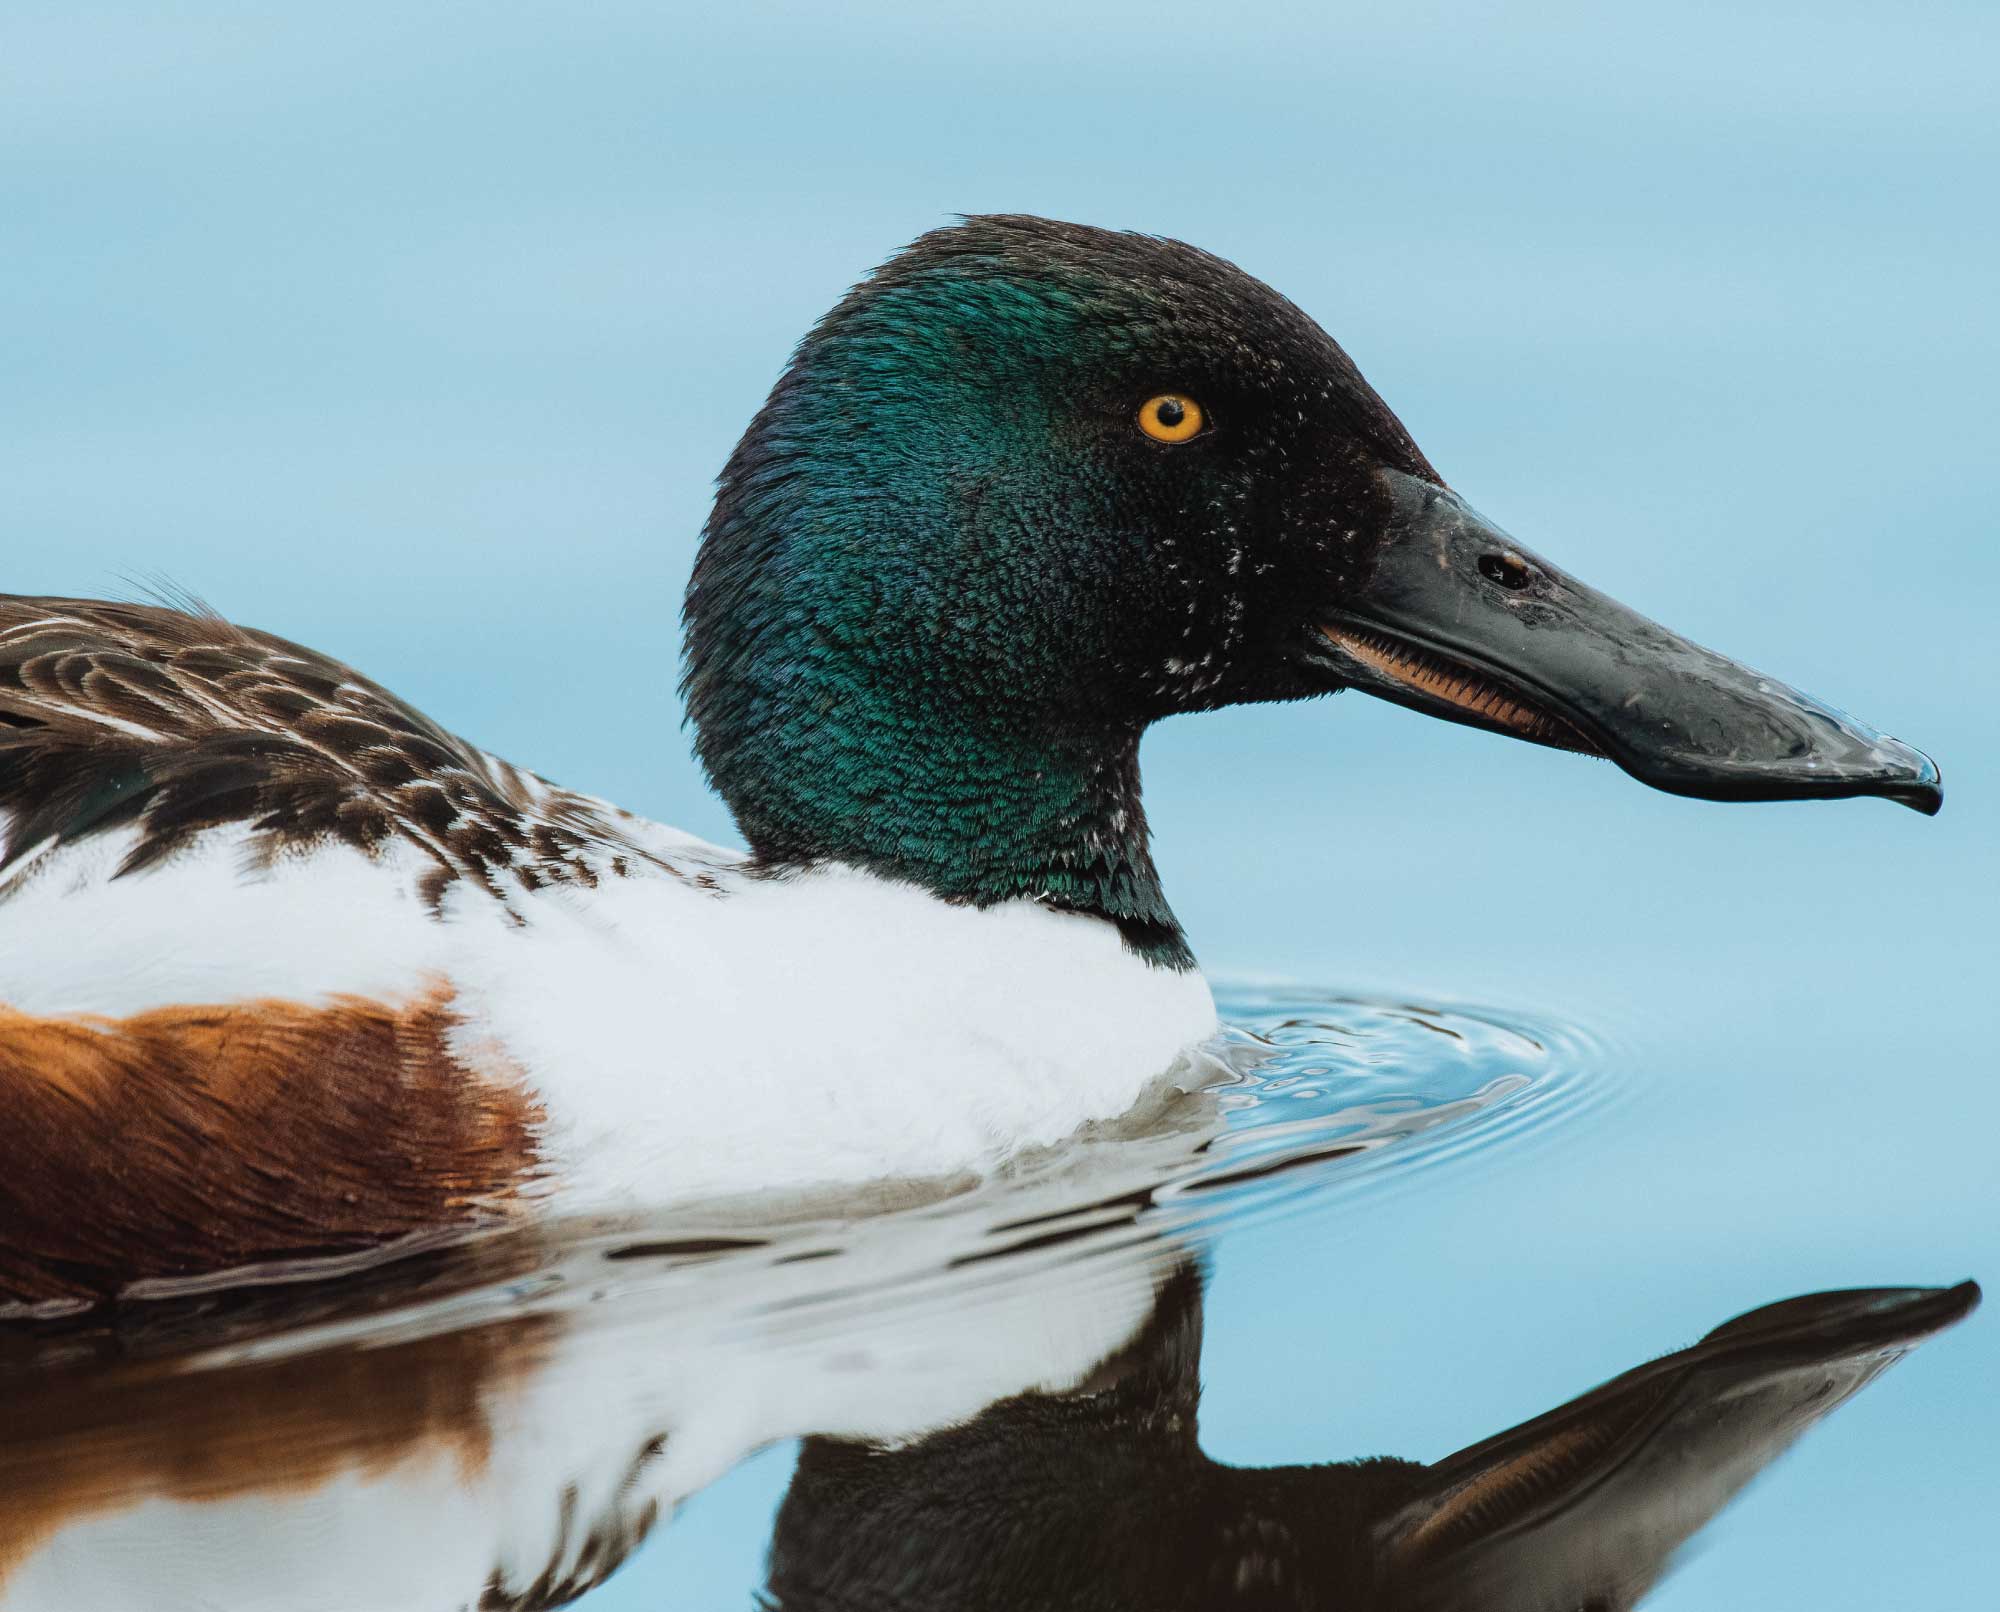 A male northern shoveler duck, or spoonie